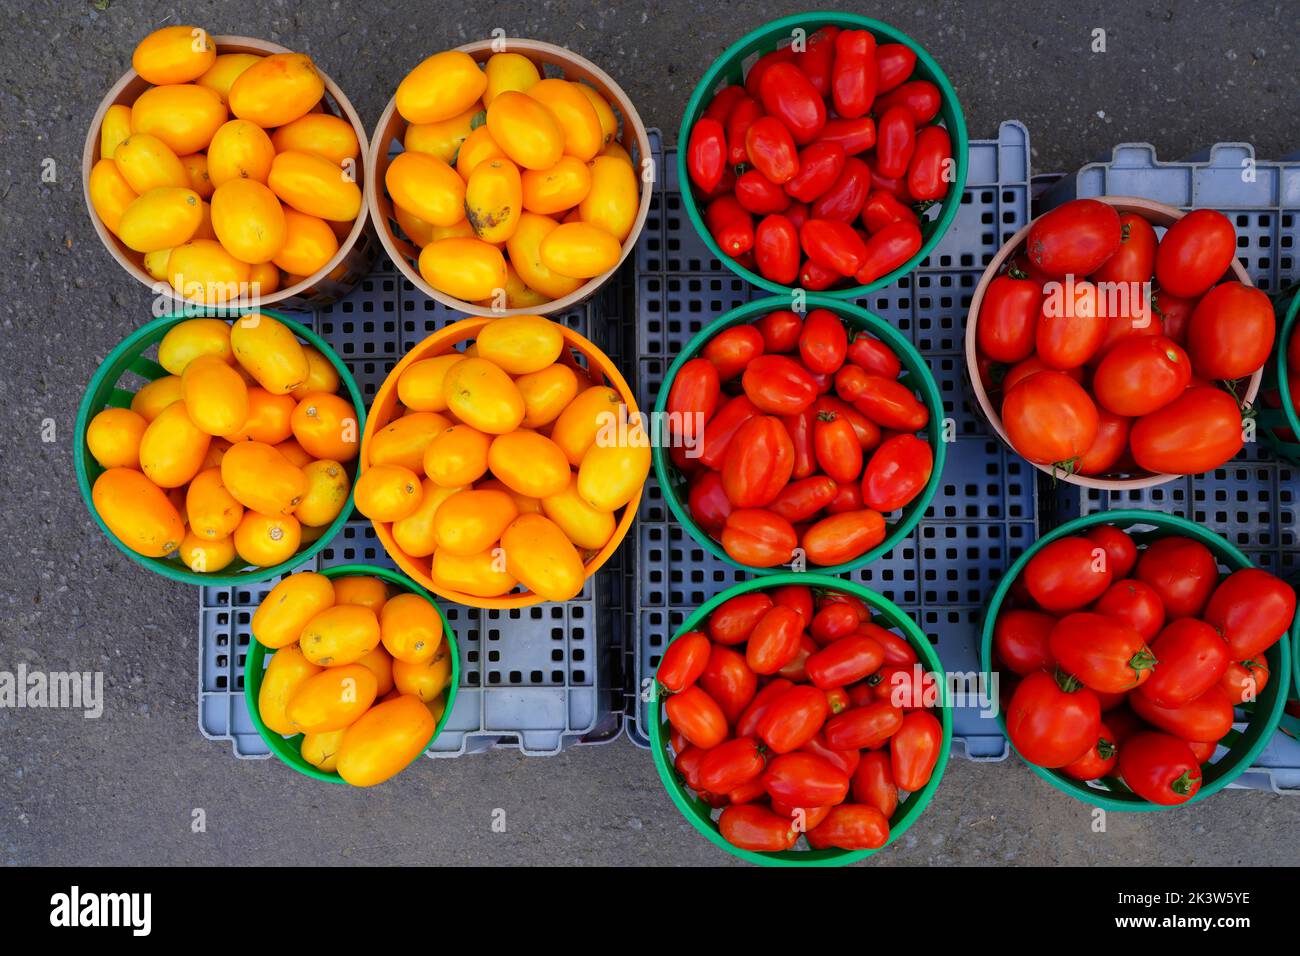 Baskets of colorful cherry tomatoes at the farmers market Stock Photo